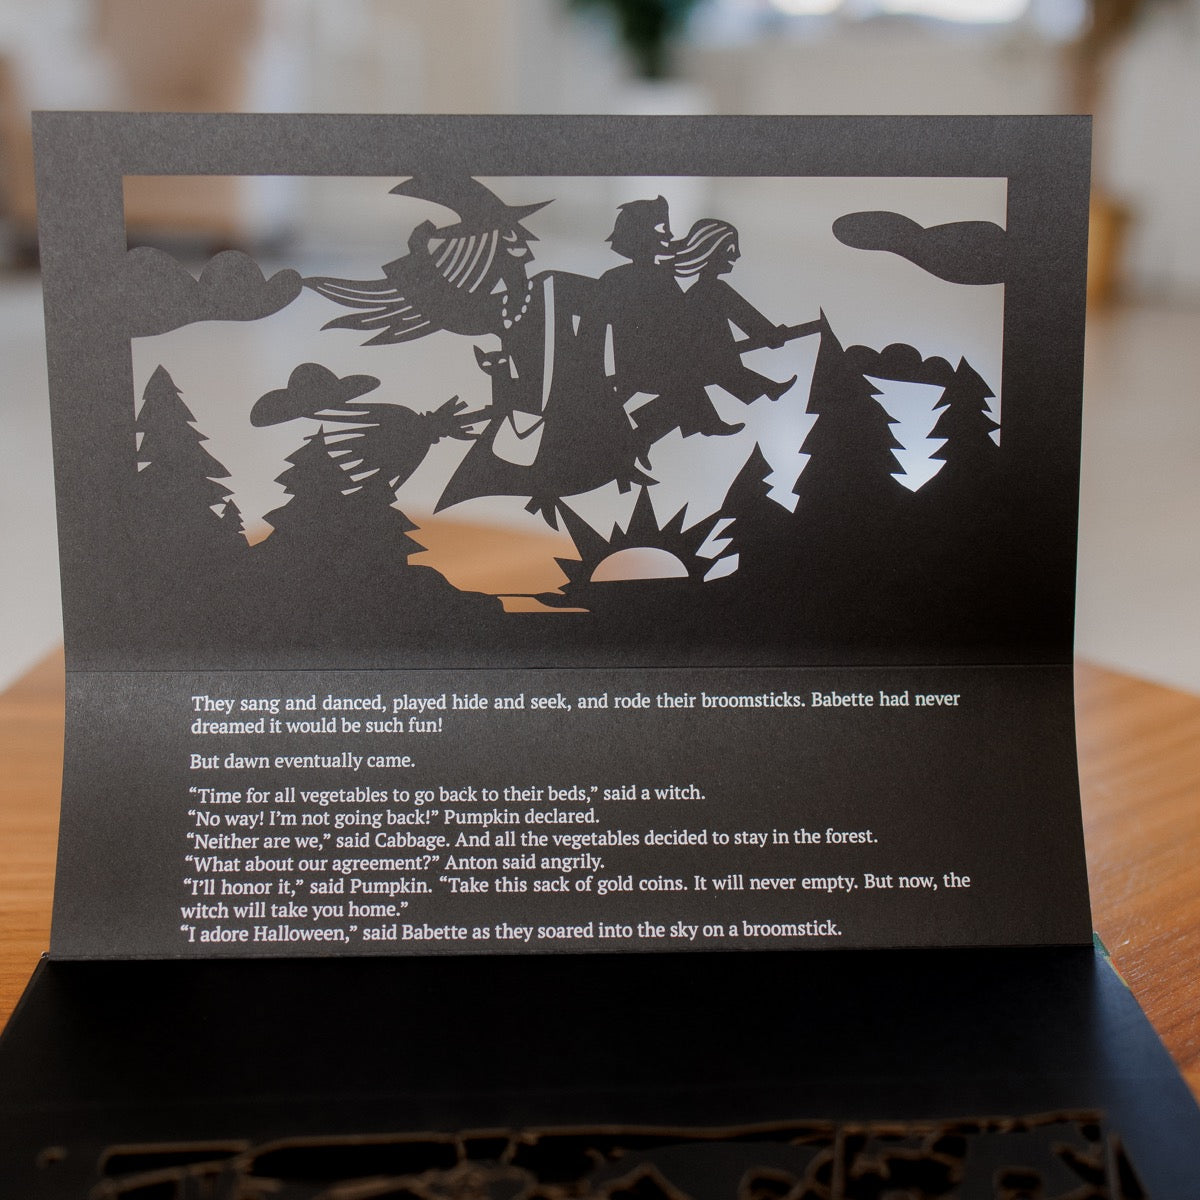 Shadow Play Set | A Tale for Halloween